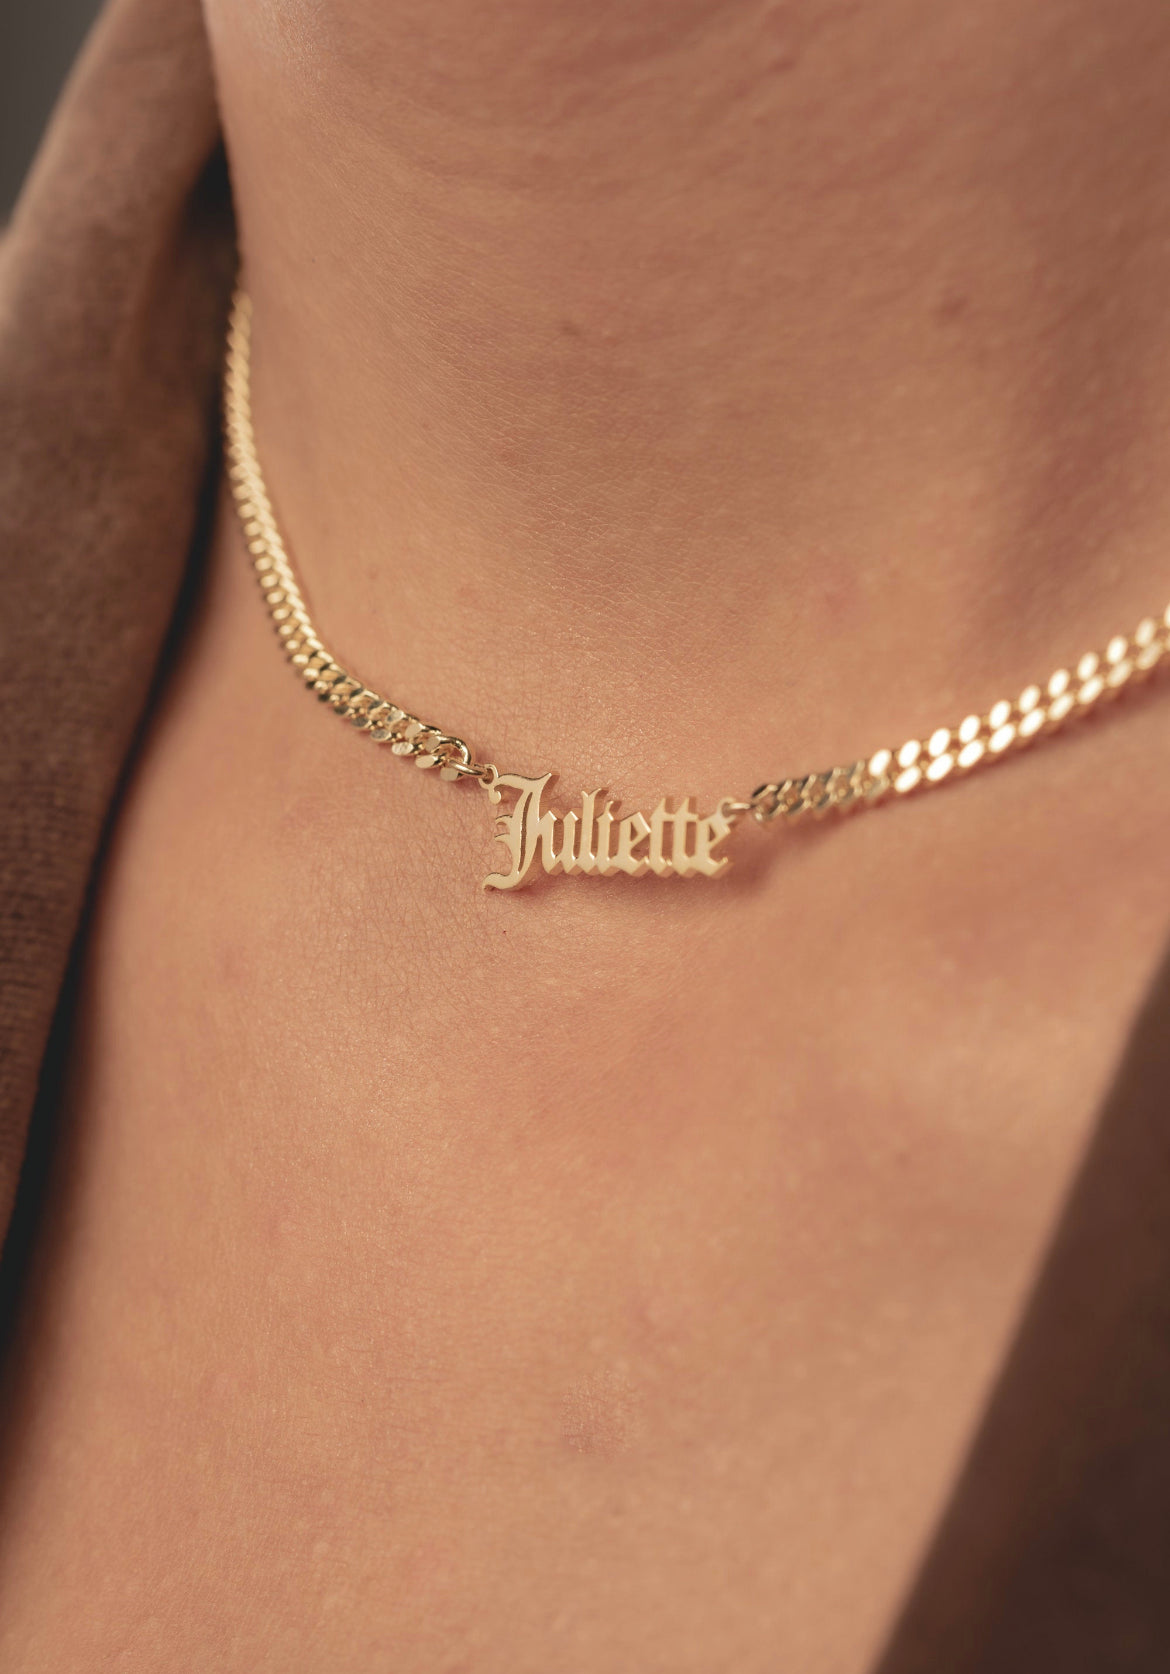 Custom Old English Name Necklace with Cuban Link Chain